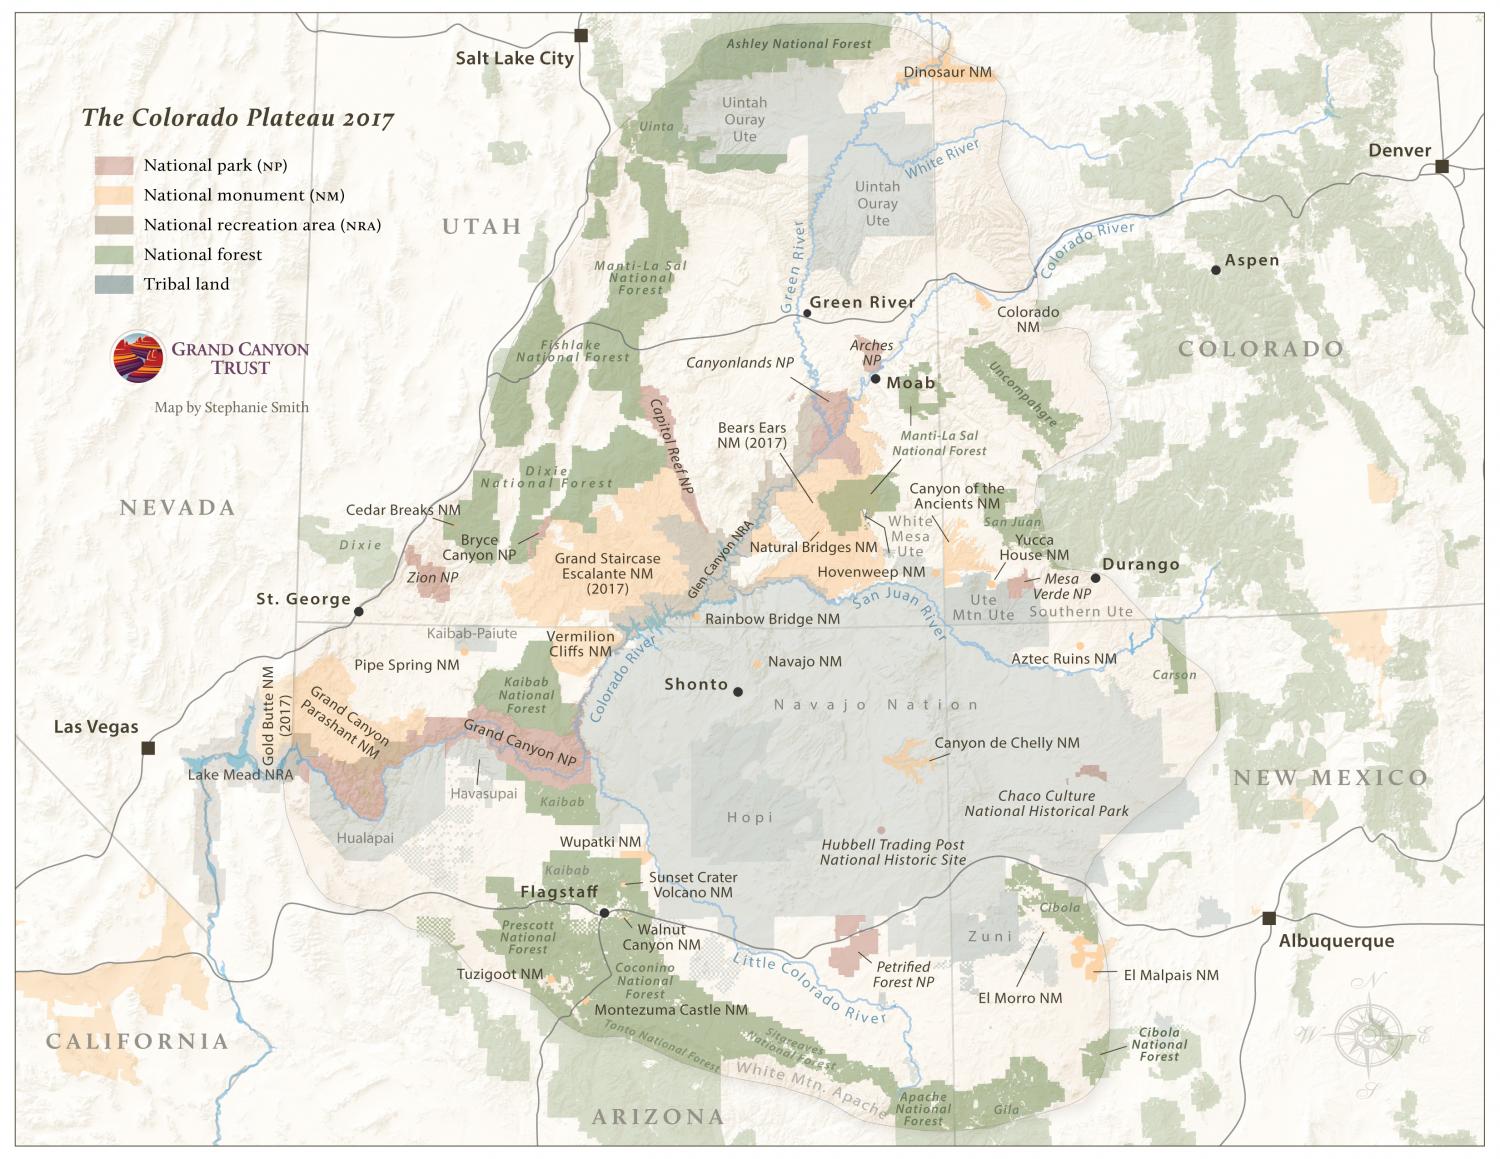 Tribal lands and National Parks, Monuments and Forests on the Colorado Plateau